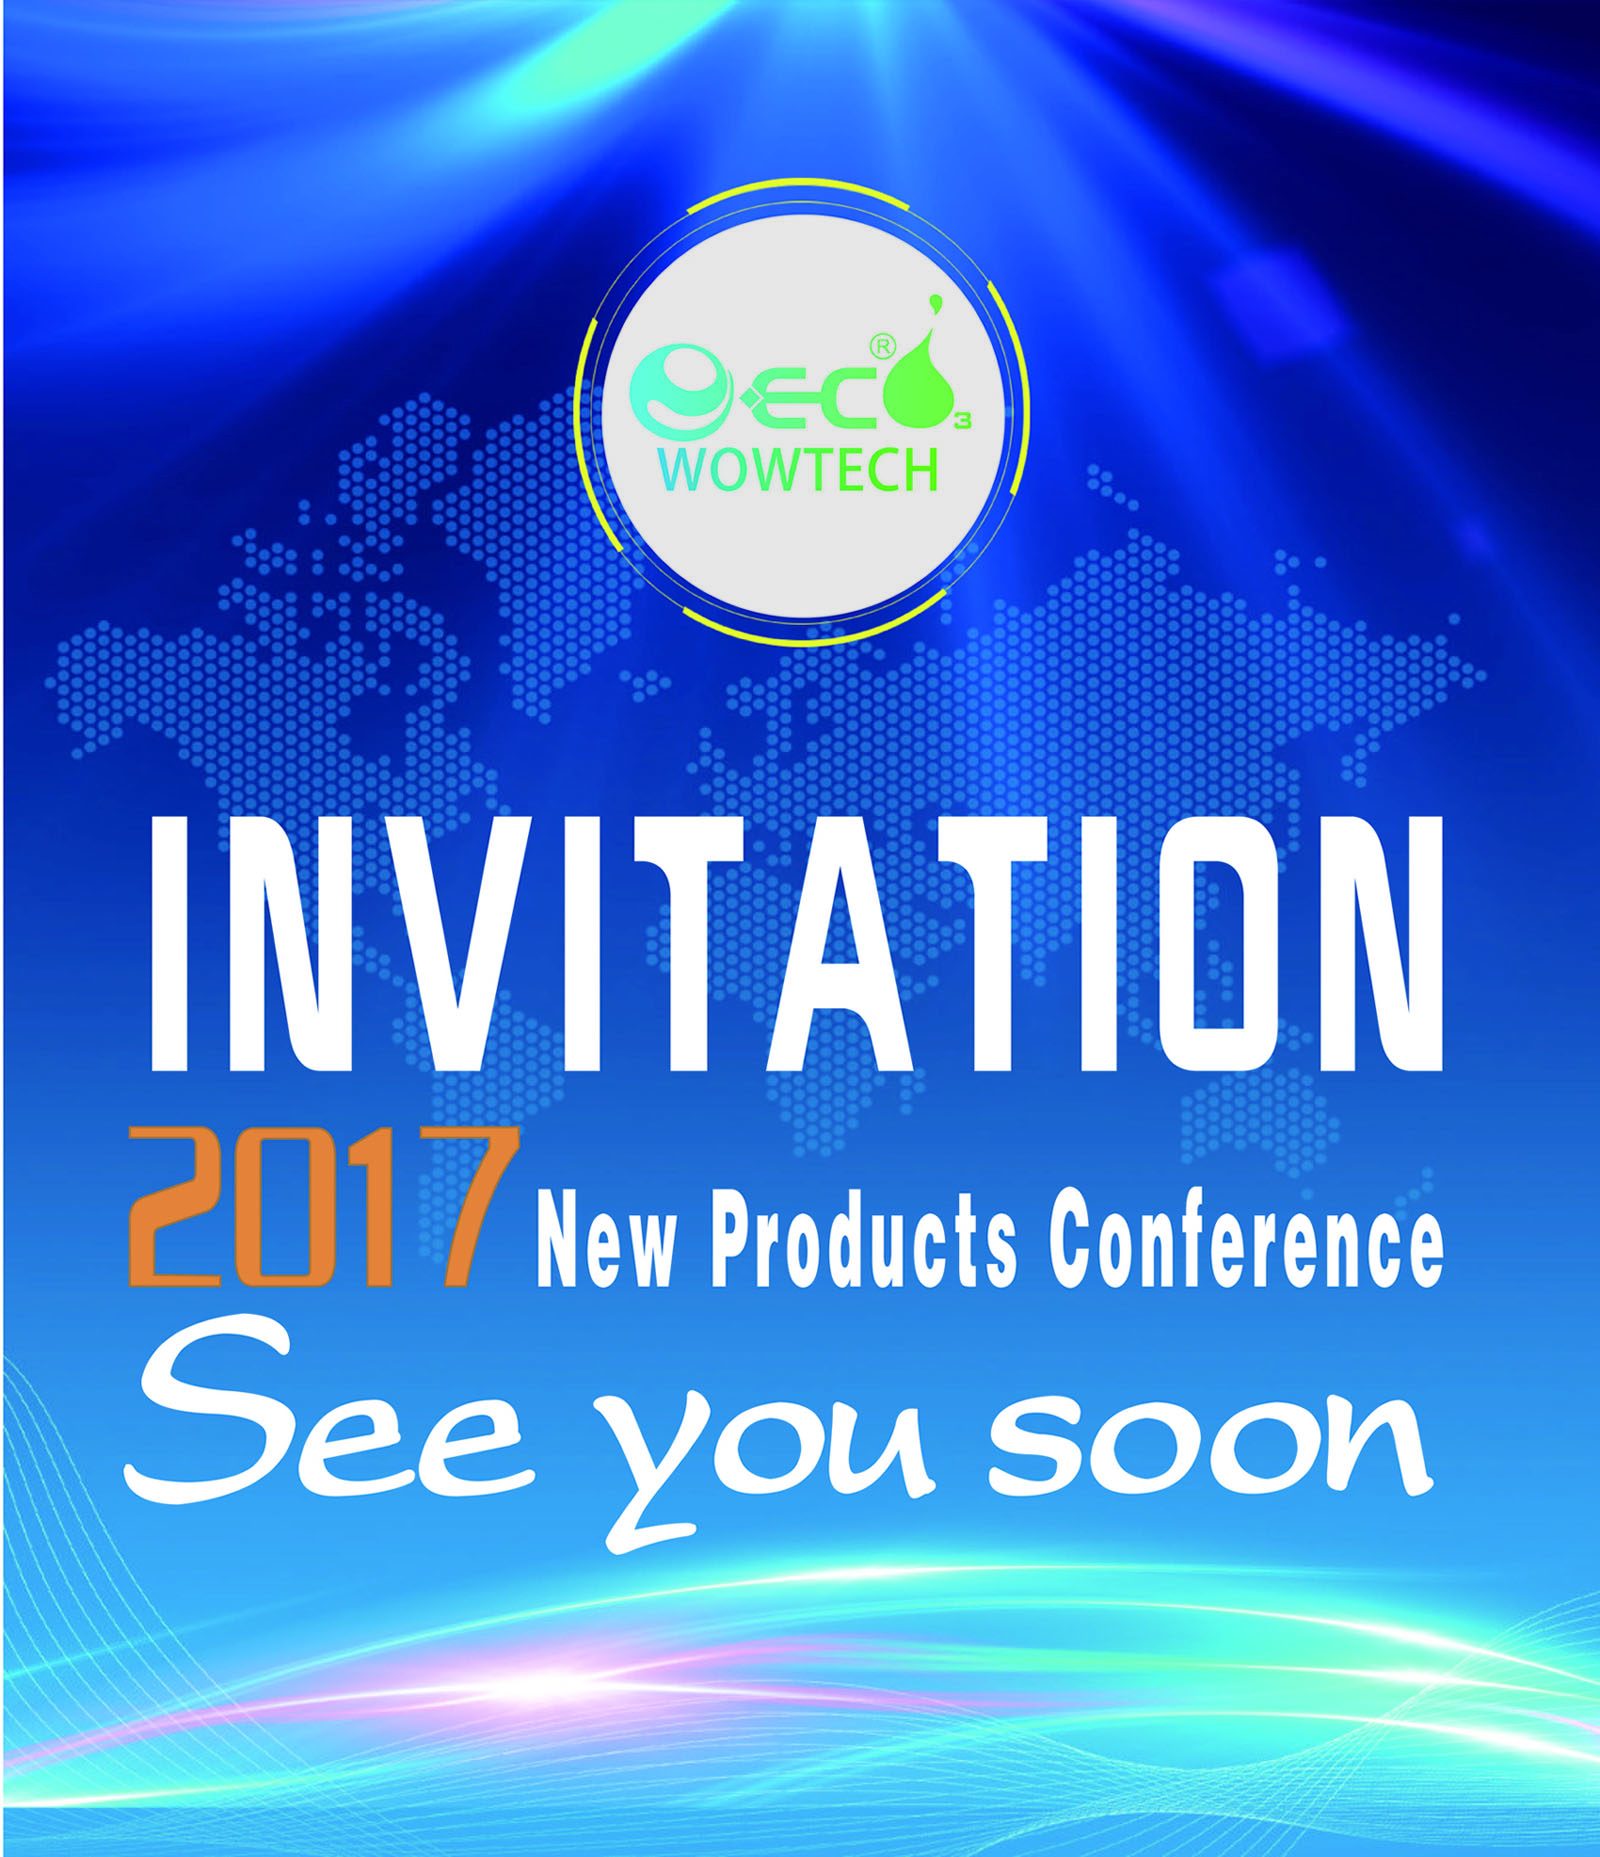 WOWTECH 2017 New Products Conference